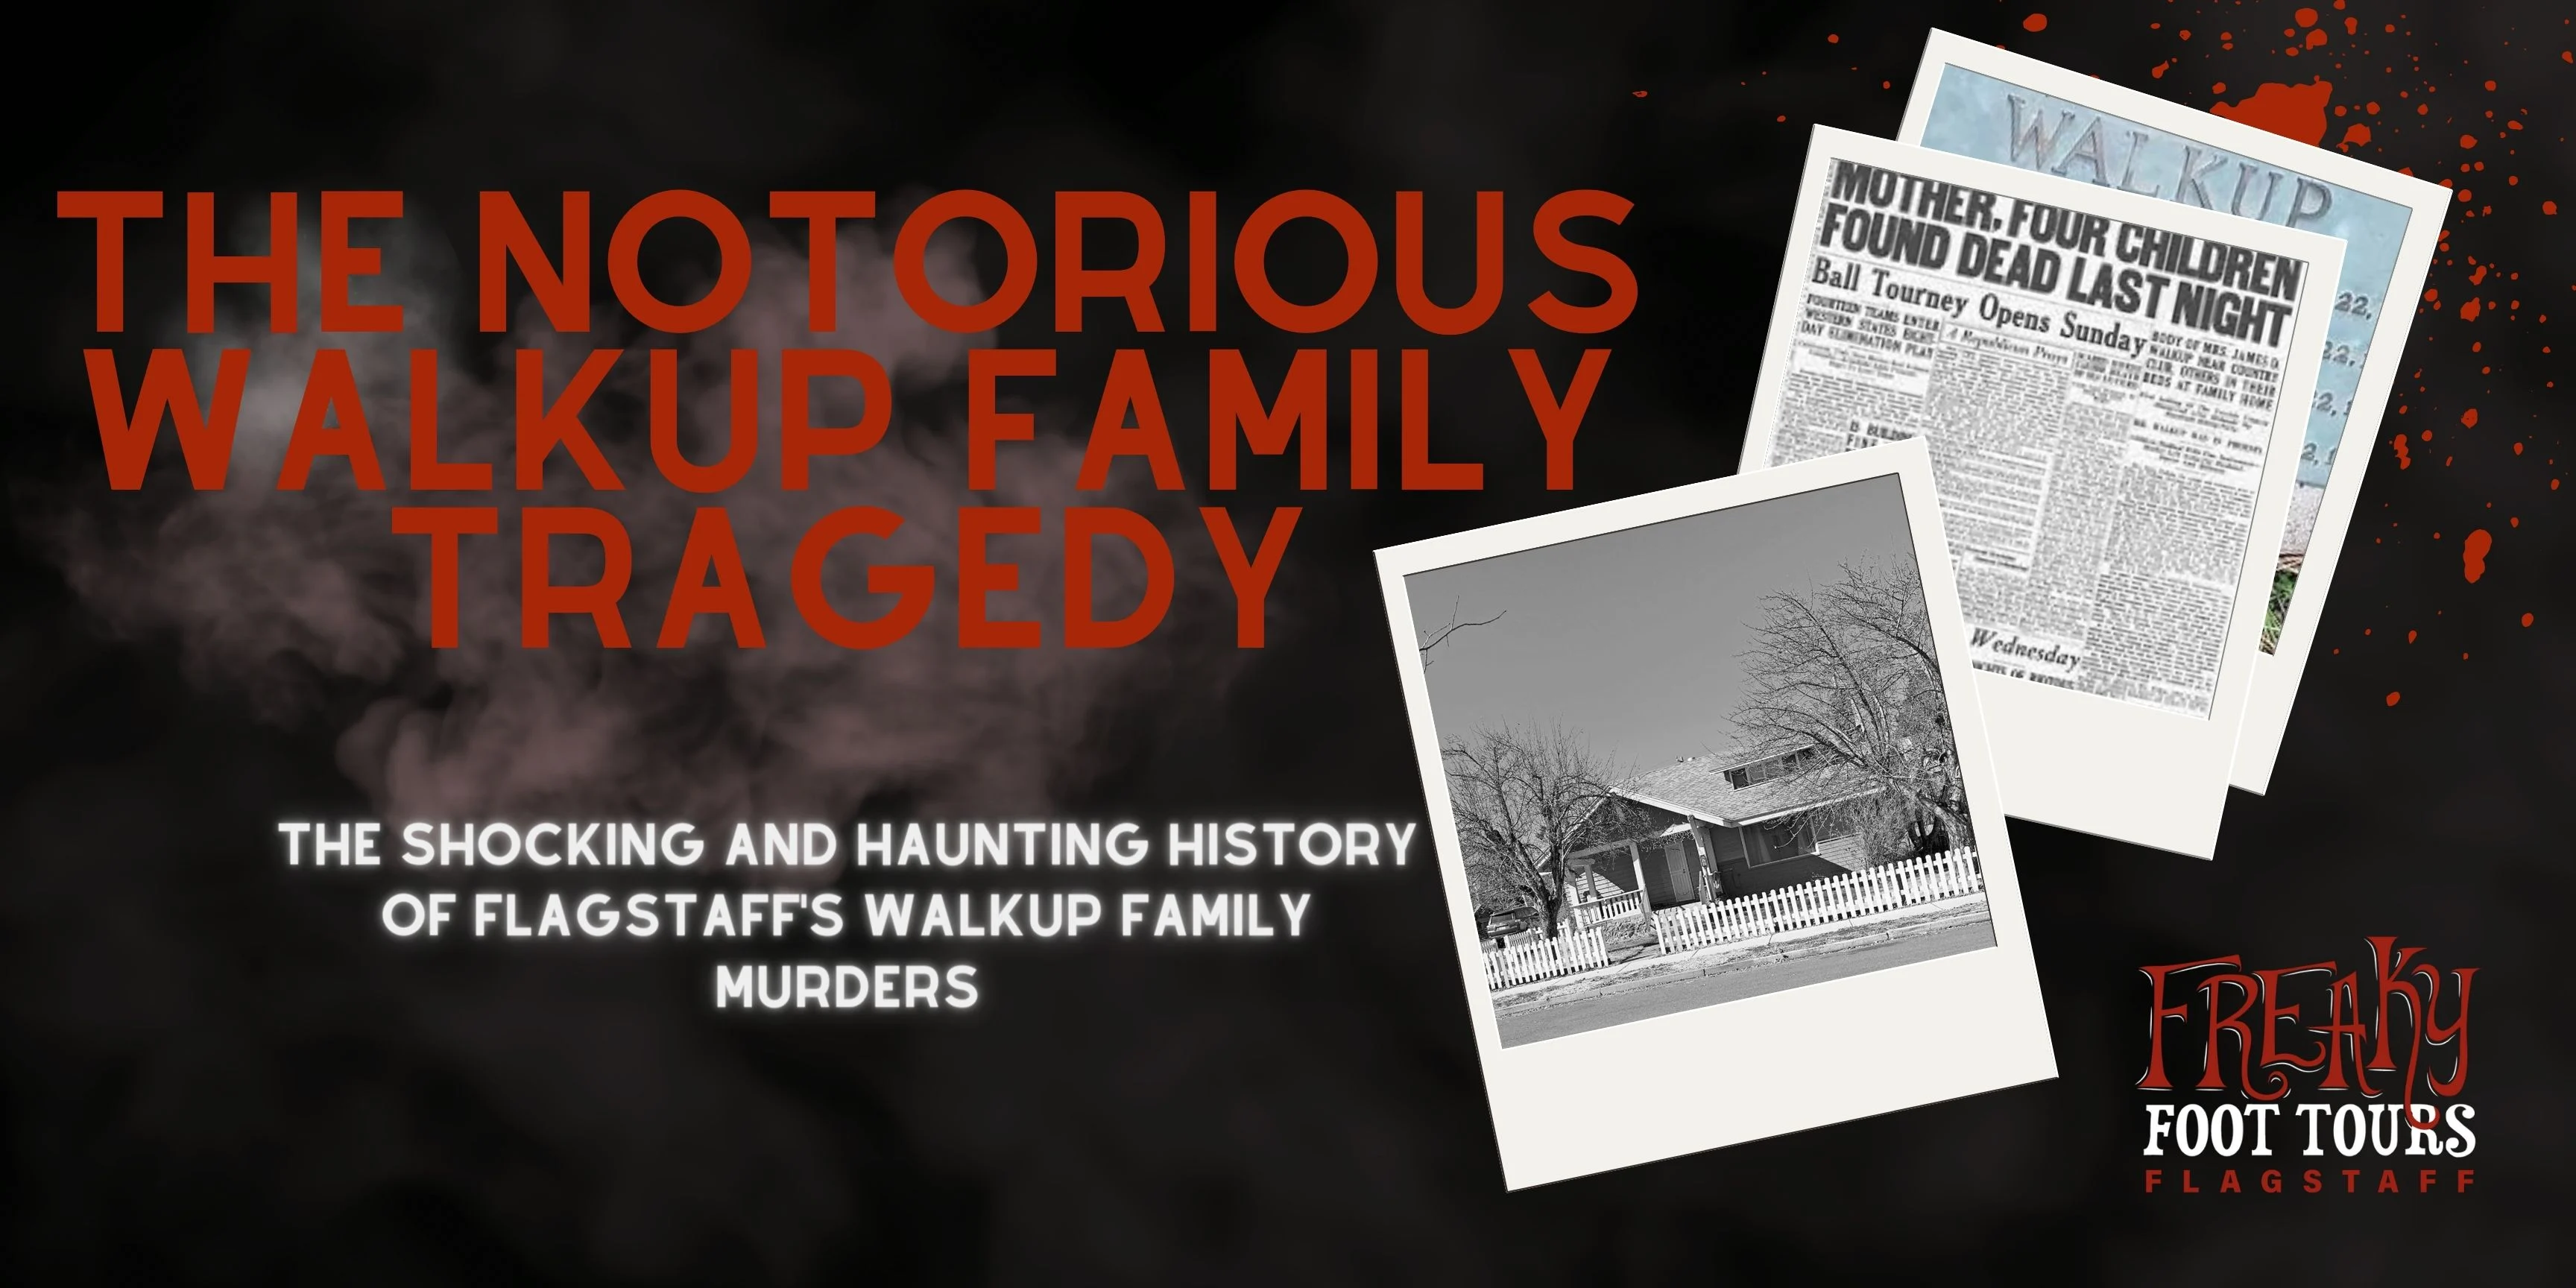 The Notorious Walkup Family Tragedy